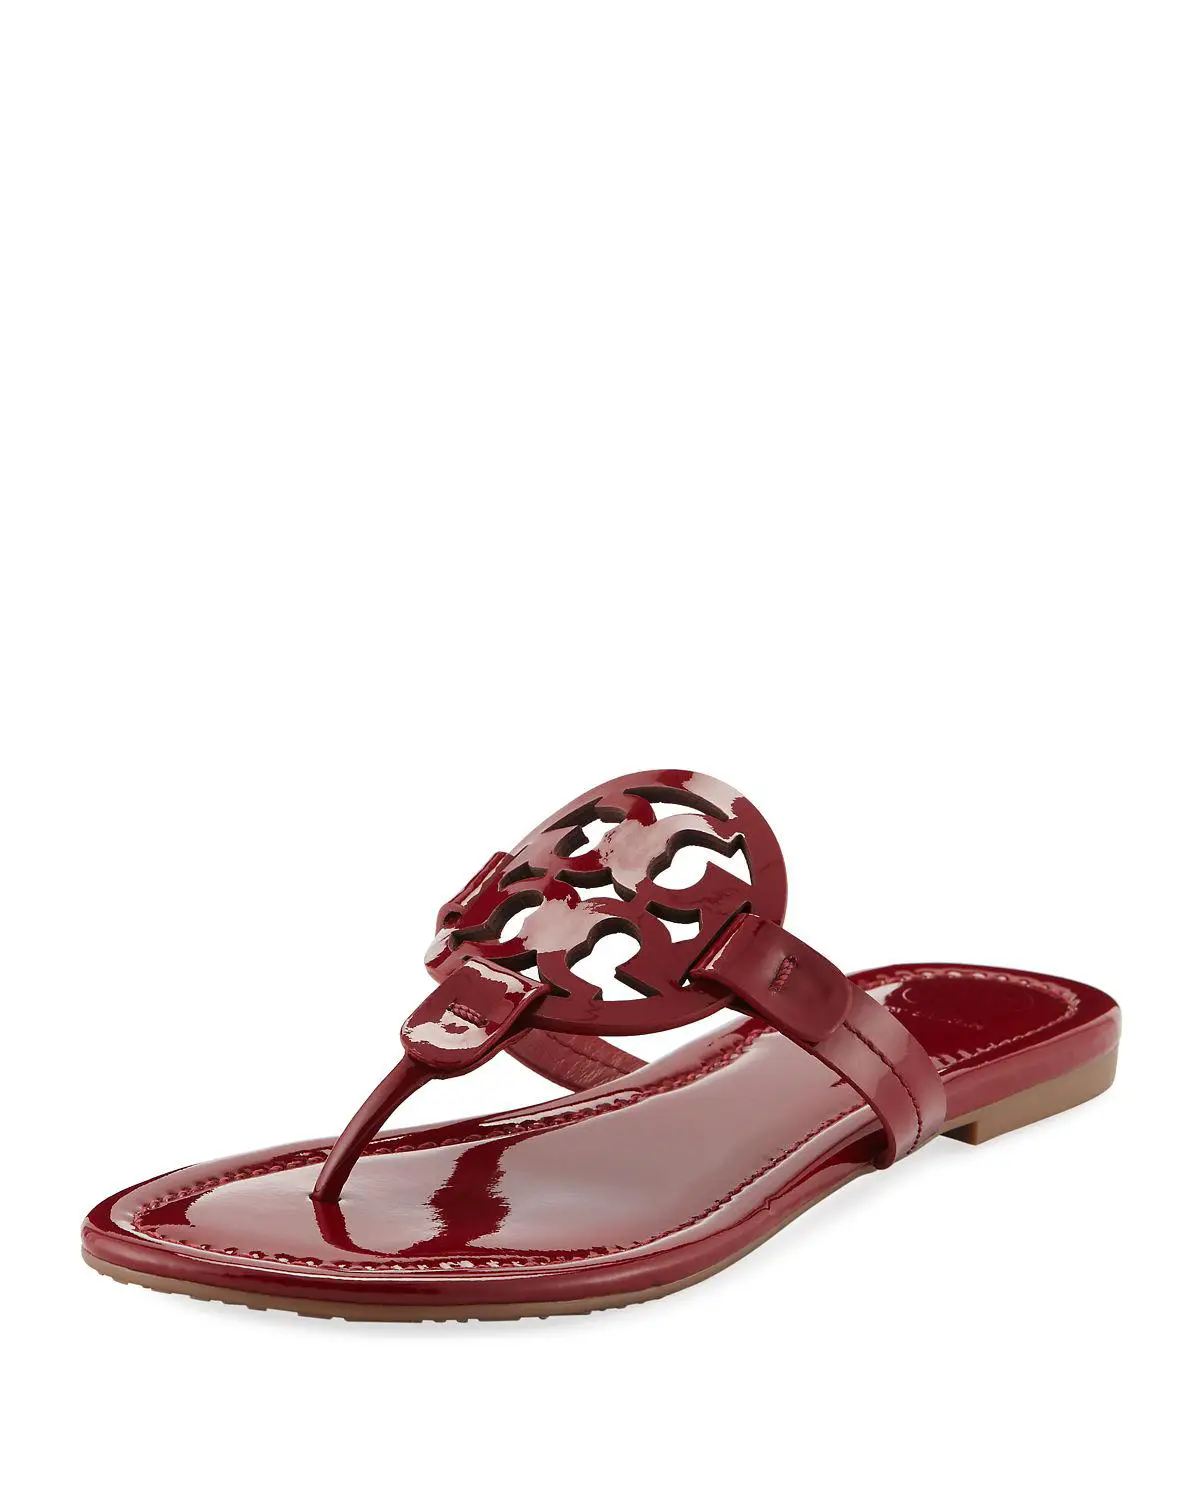 Tory Burch Miller Medallion Patent Leather Flat Thong Sandals in Dark ...